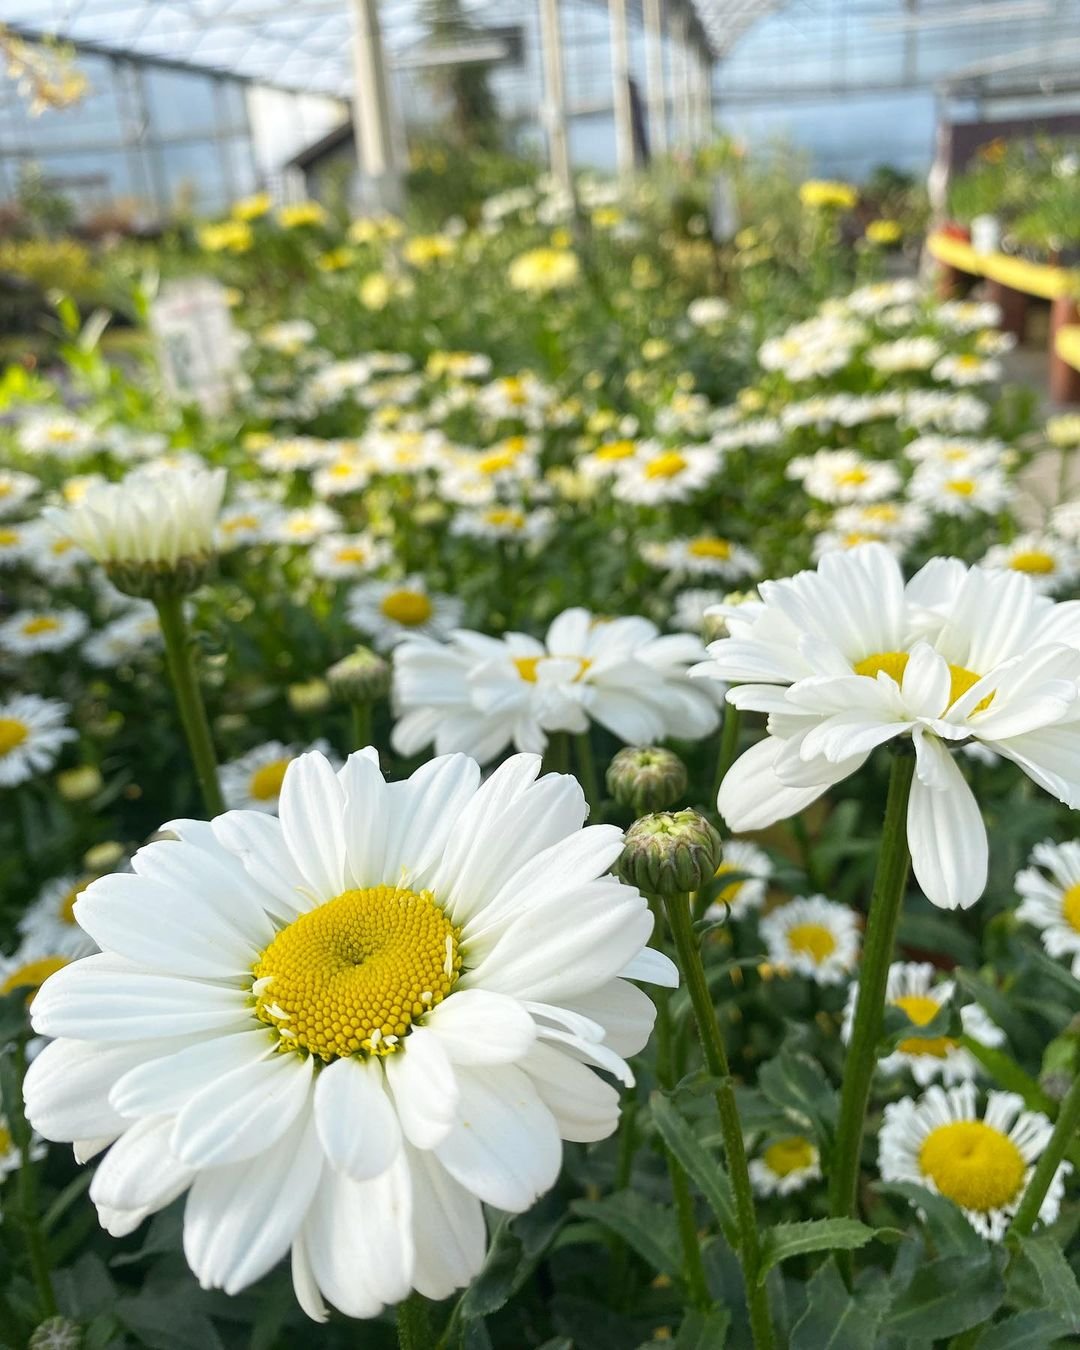 Shasta Daisy (Leucanthemum x superbum): A beautiful white flower with yellow center, commonly known as Shasta Daisy.

